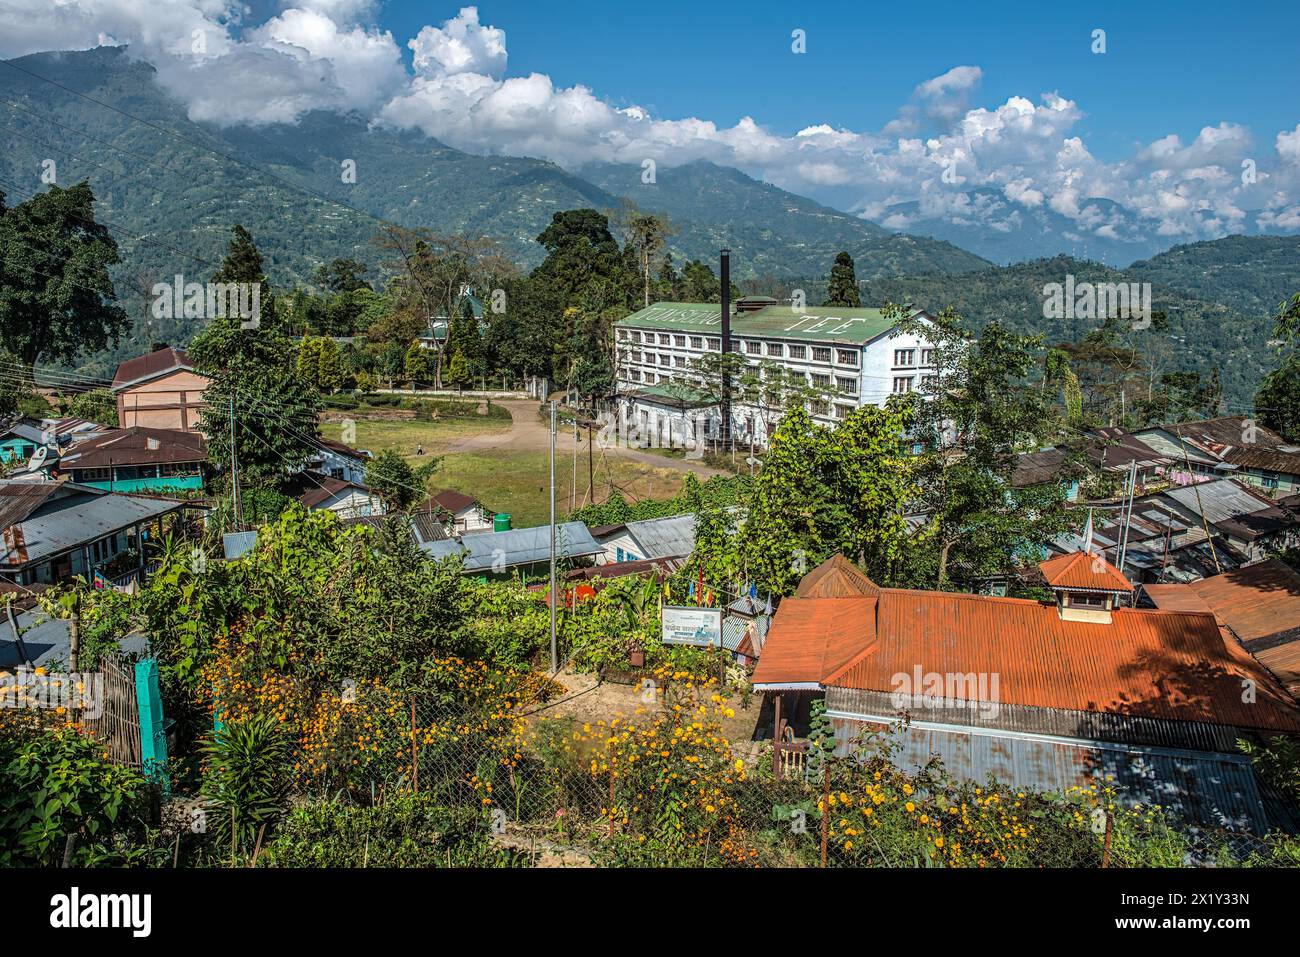 Factory building of the Tumsong plantation, idyllically located in the middle of the tea fields. To the left behind the trees is the colonial-style gu Stock Photo